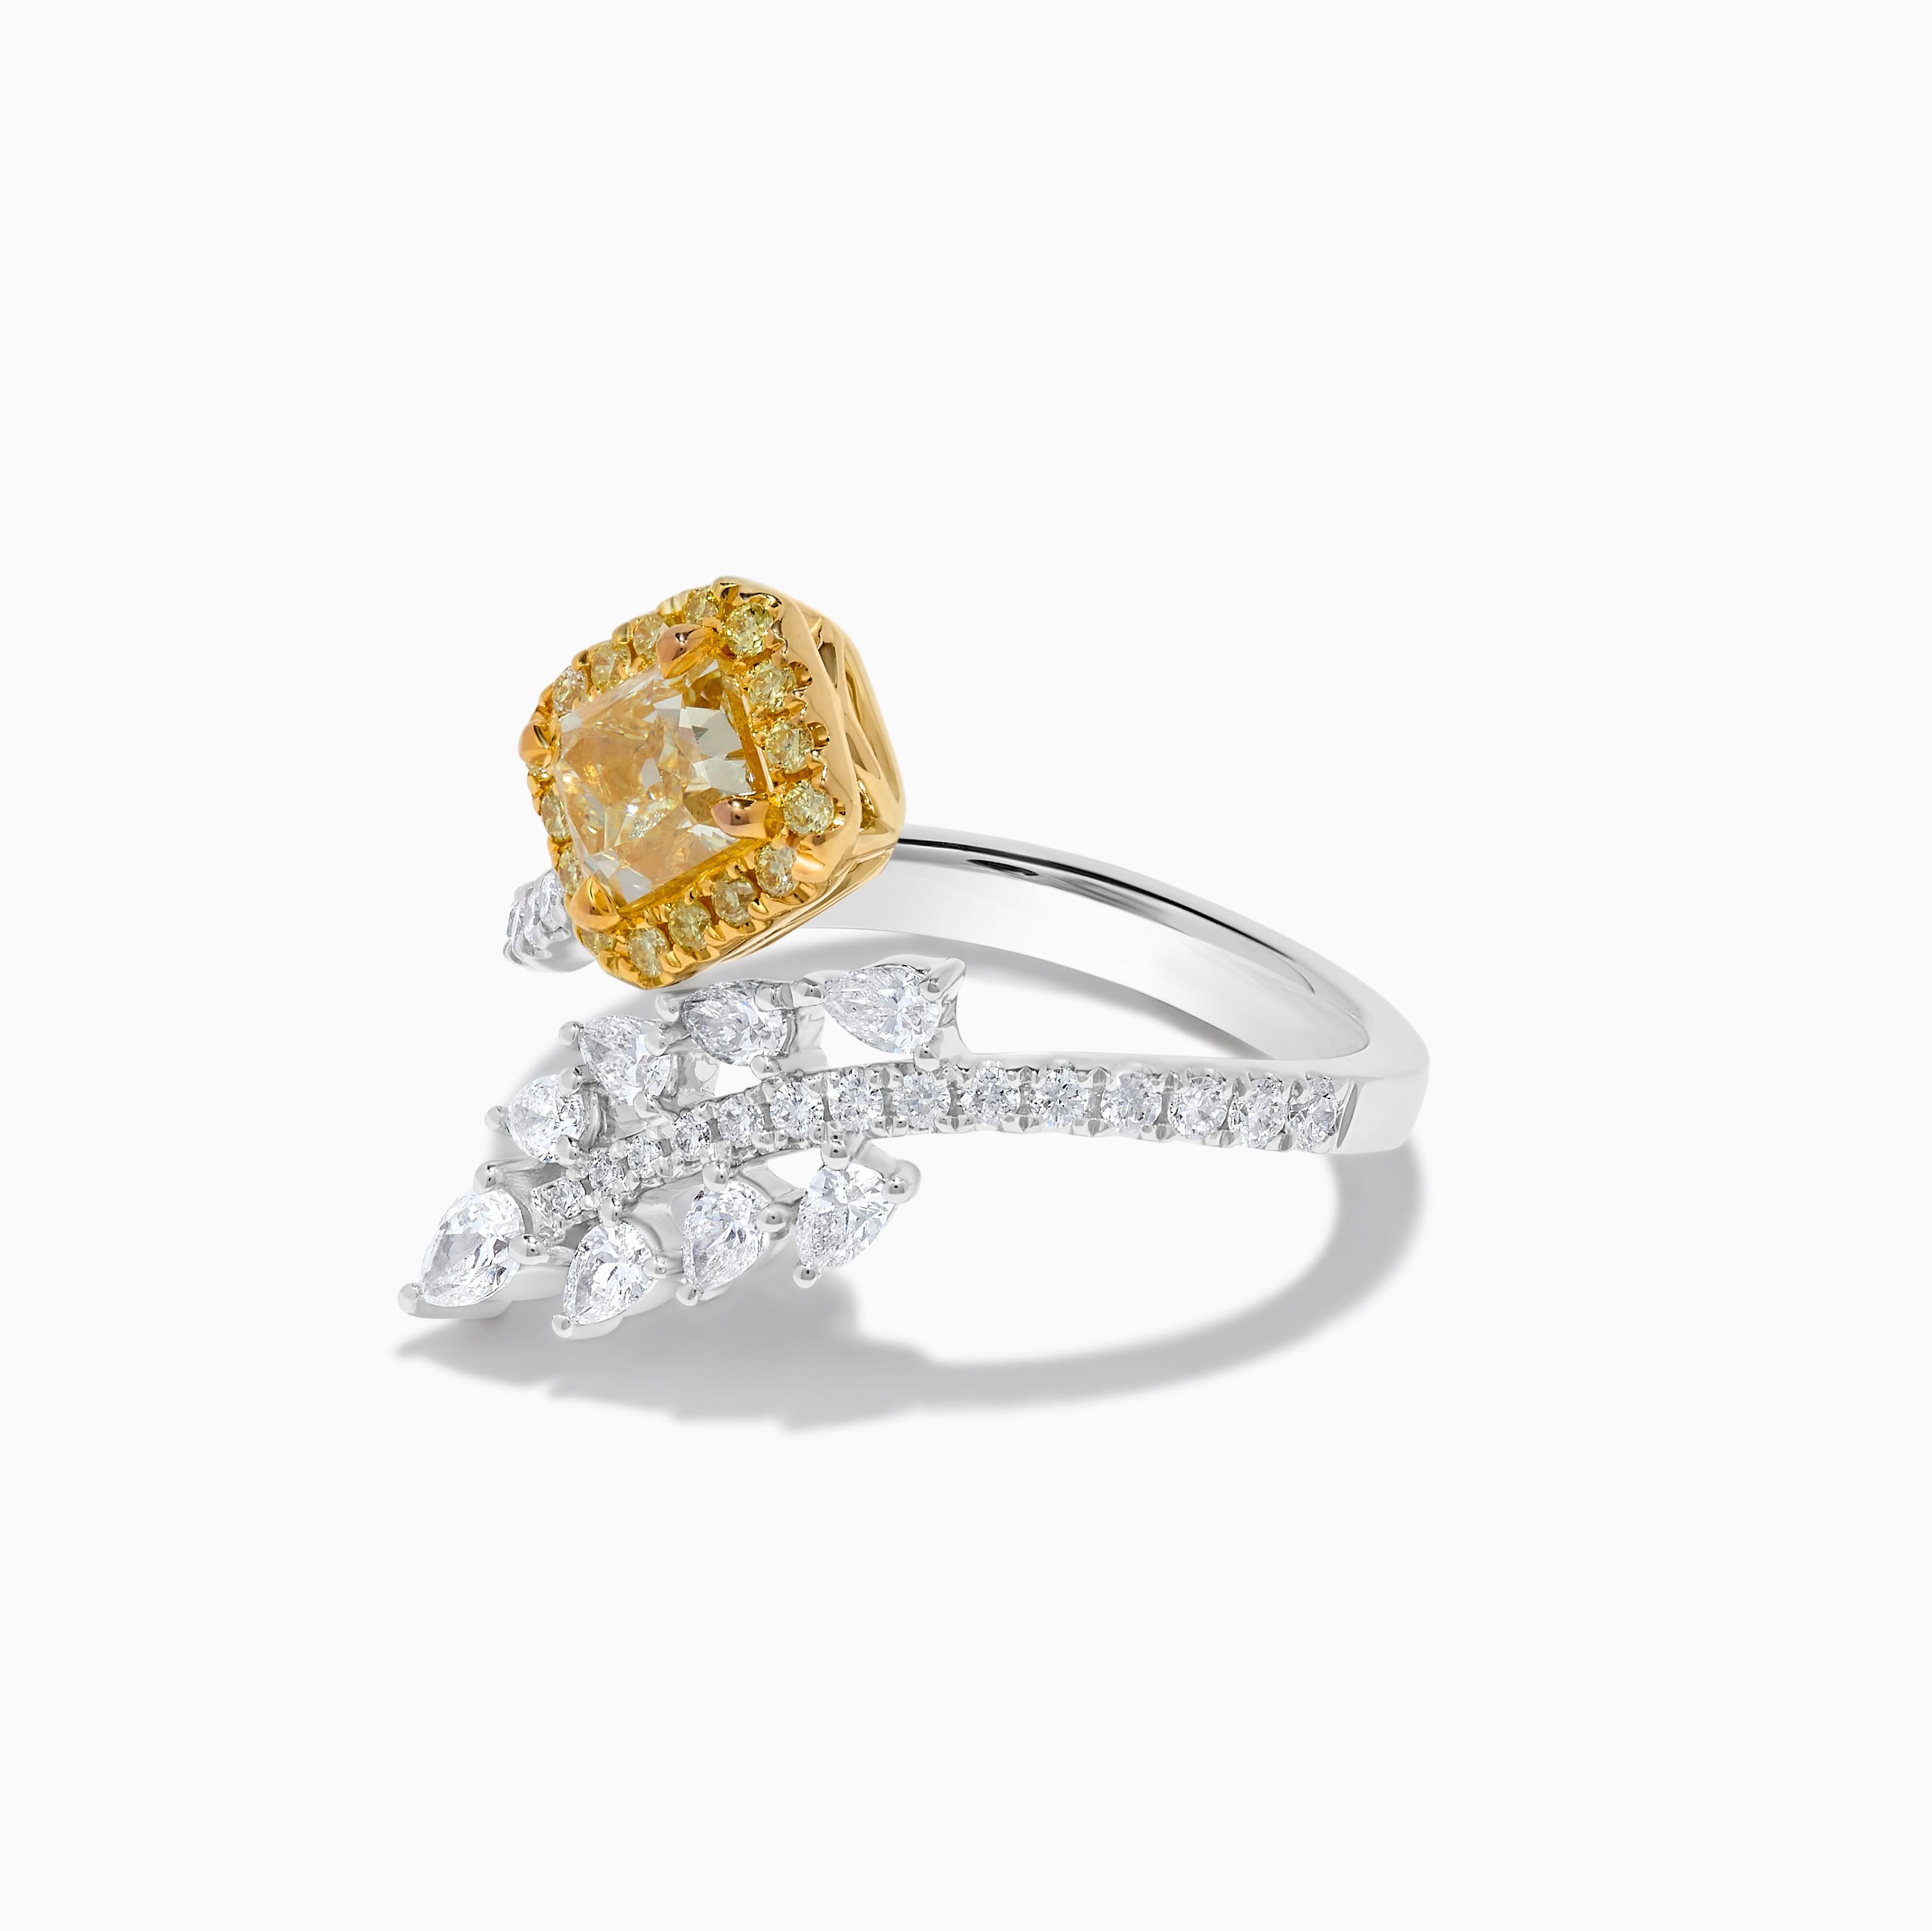 RareGemWorld's classic GIA certified diamond ring. Mounted in a beautiful 18K Yellow and White Gold setting with a natural radiant cut yellow diamond. The yellow diamond is surrounded by natural pear cut white diamonds, round natural yellow diamond